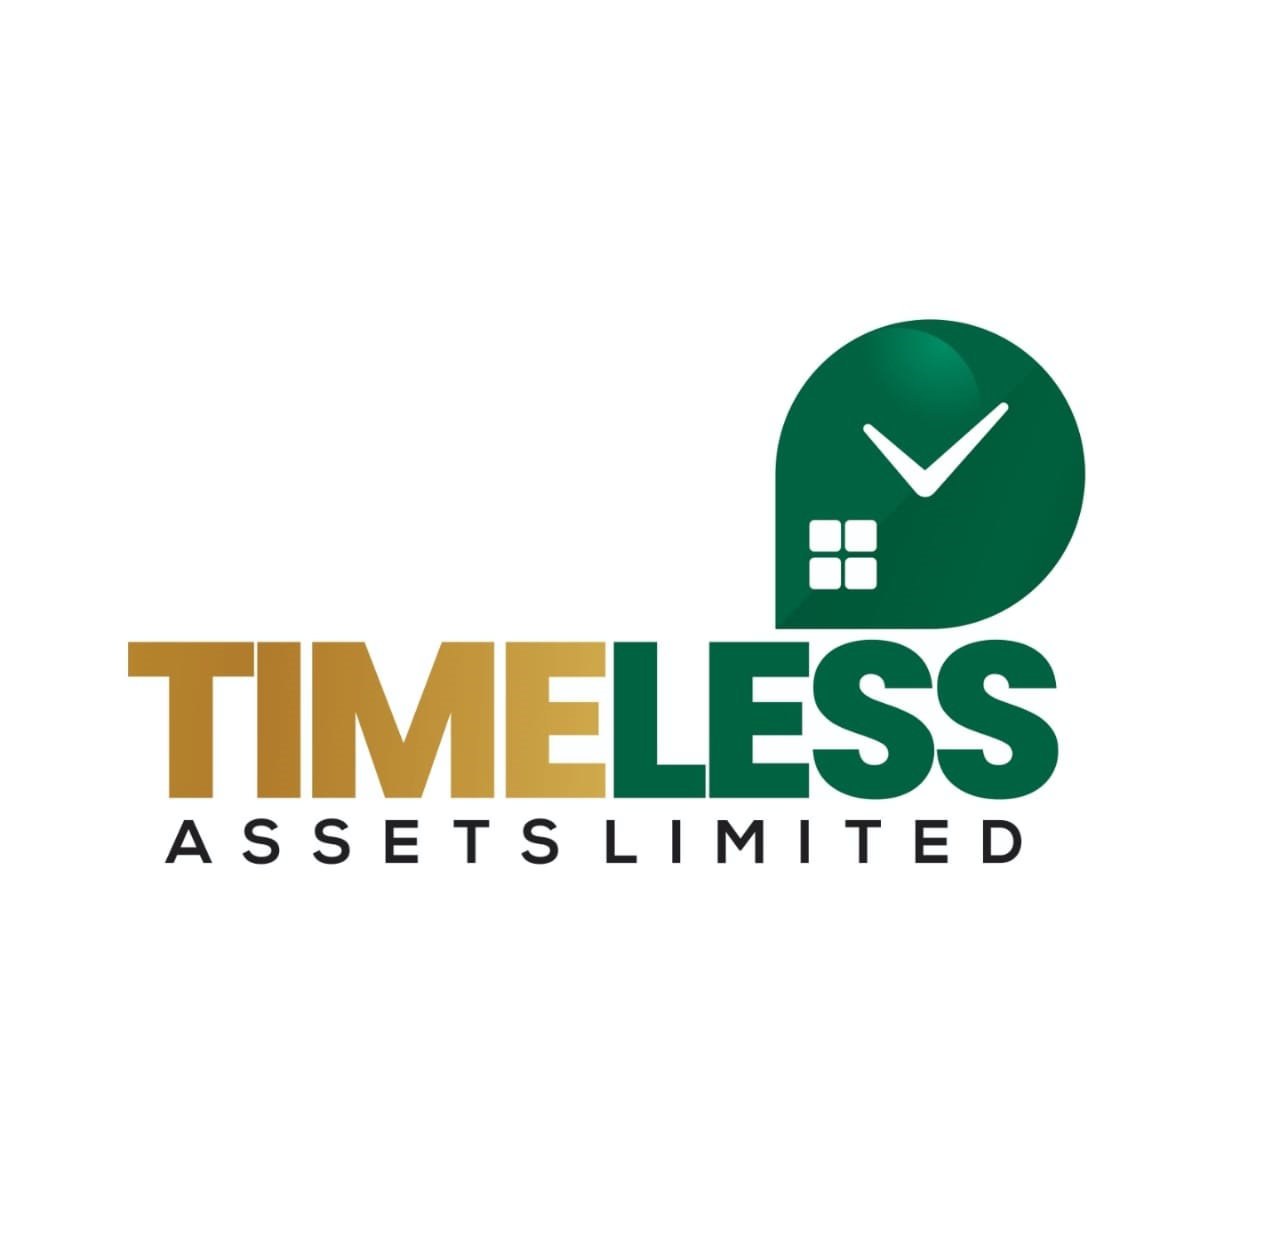 Timeless Assets Limited